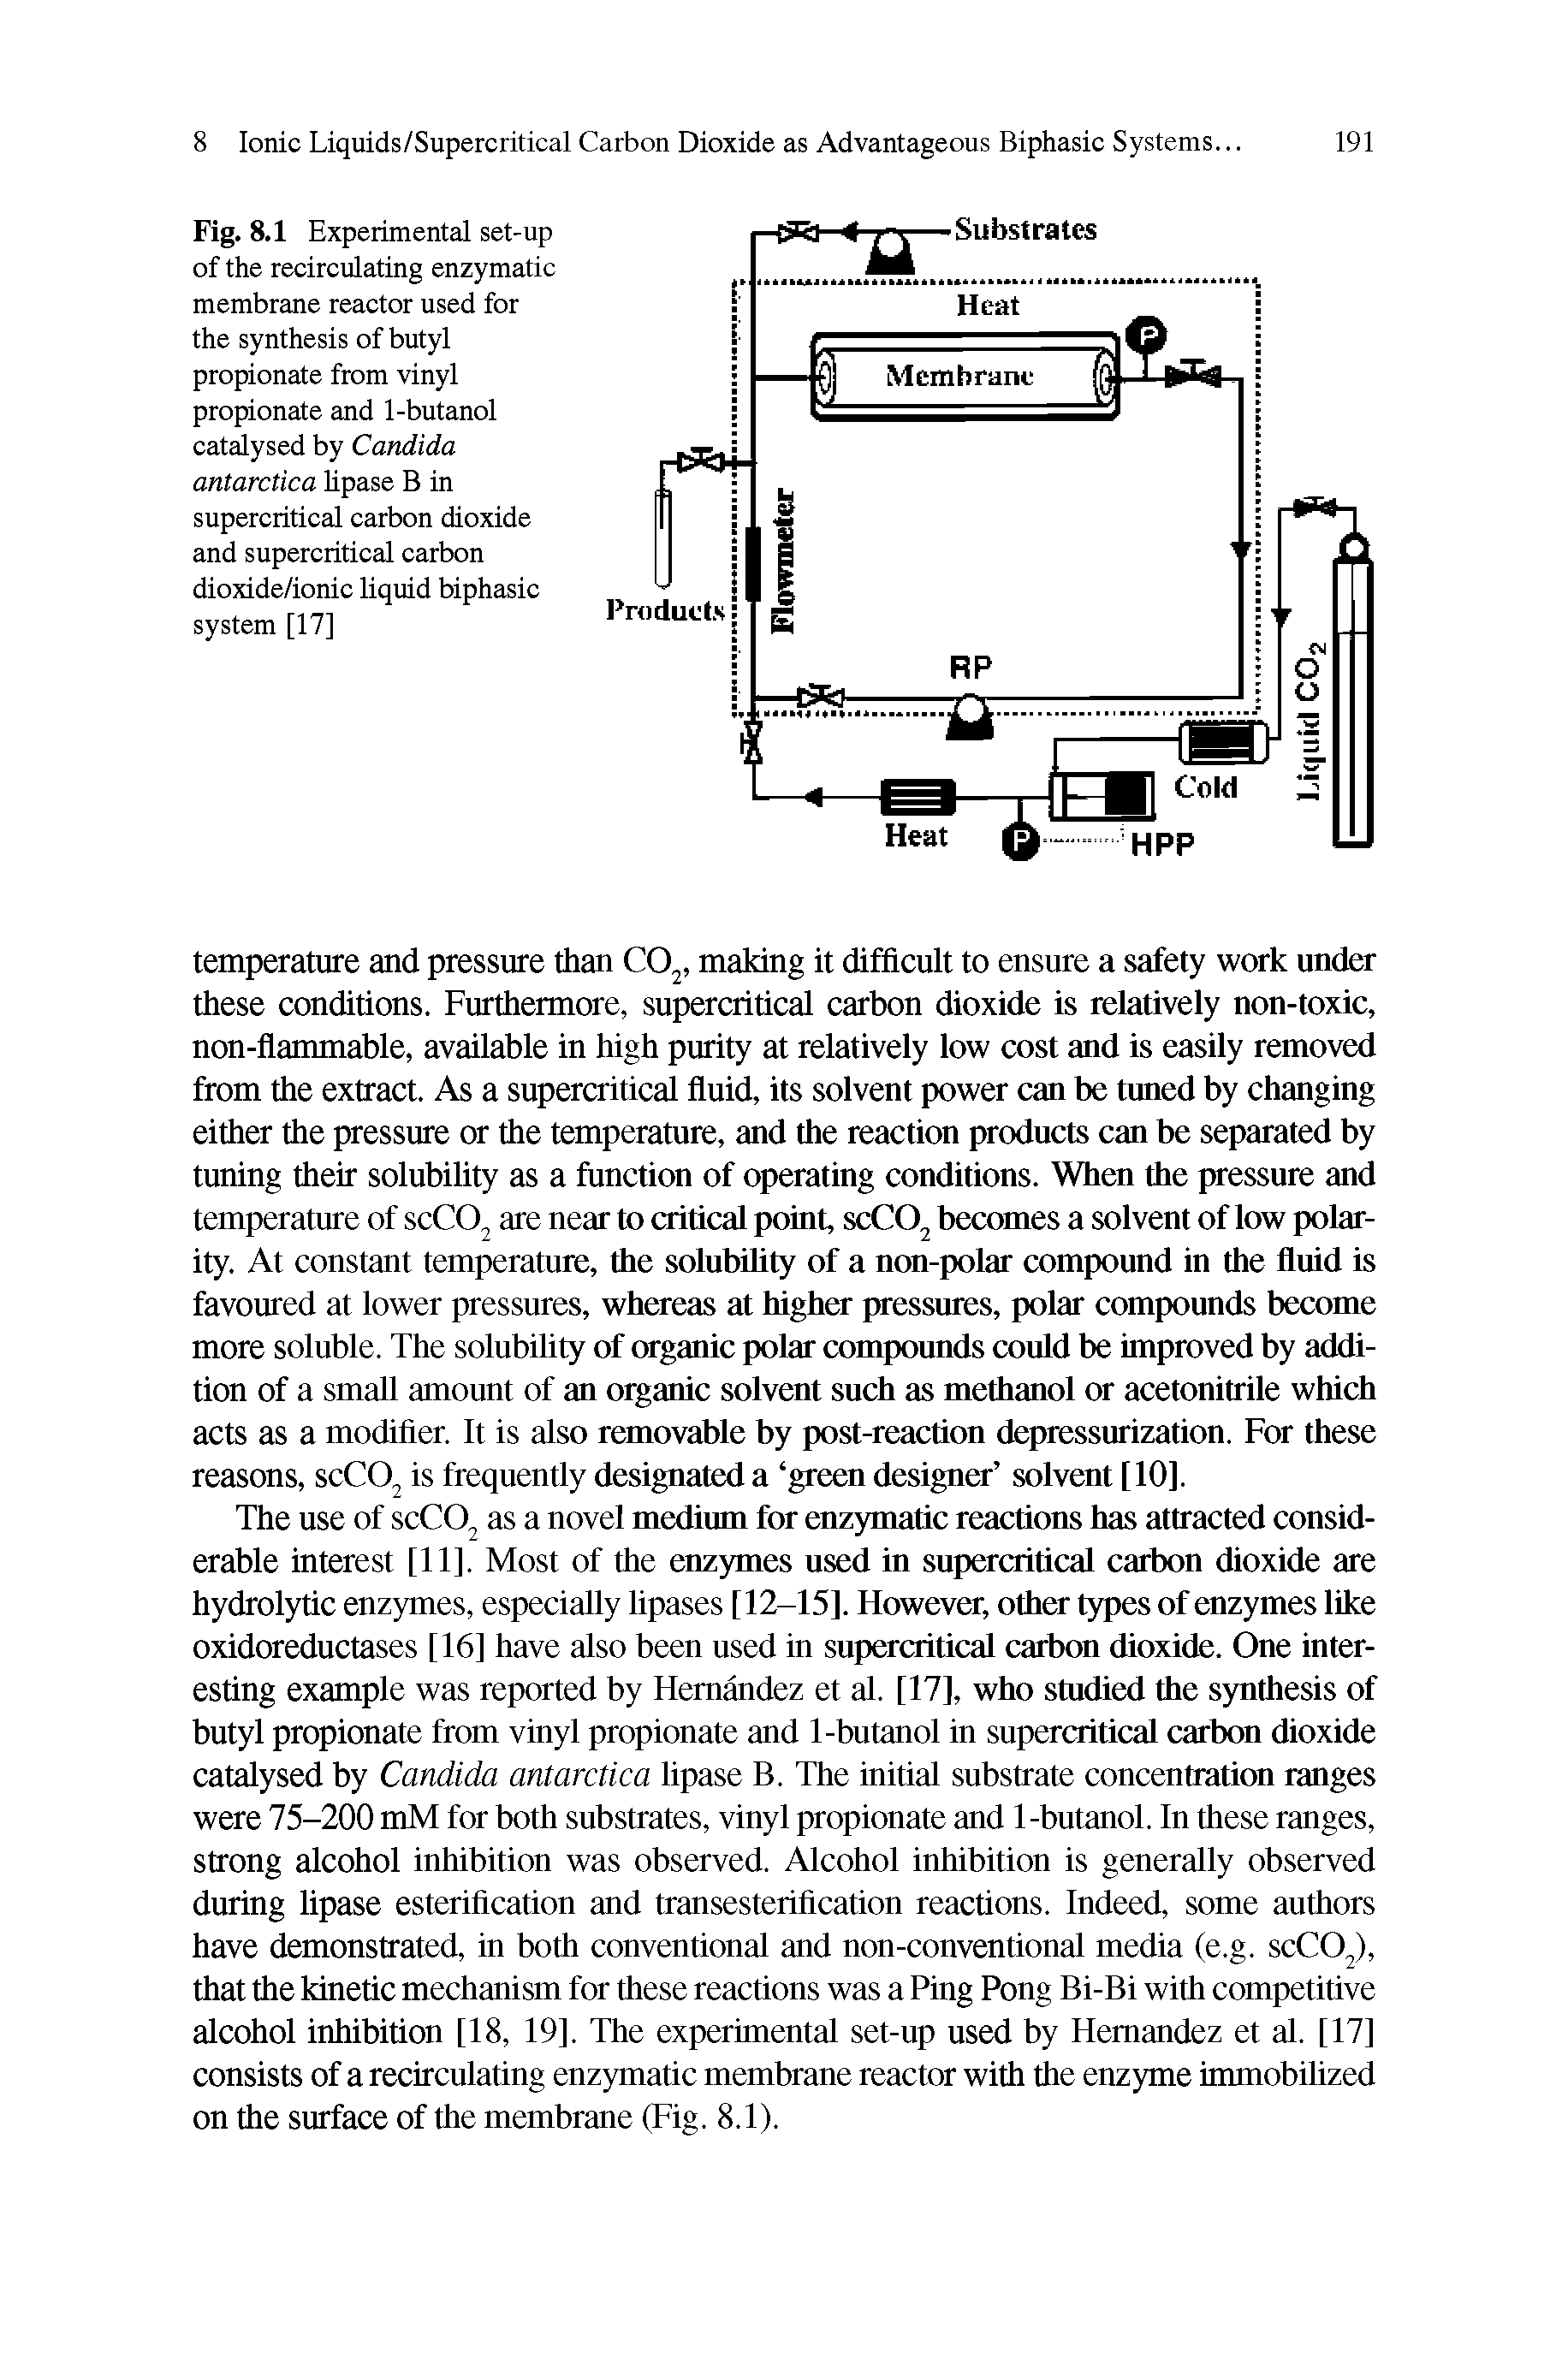 Fig. 8.1 Experimental set-up of the recirculating enzymatic membrane reactor used for the synthesis of butyl propionate from vinyl propionate and 1-butanol catalysed by Candida antarctica lipase B in supercritical carbon dioxide and supercritical carbon dioxide/ionic liquid biphasic system [17]...